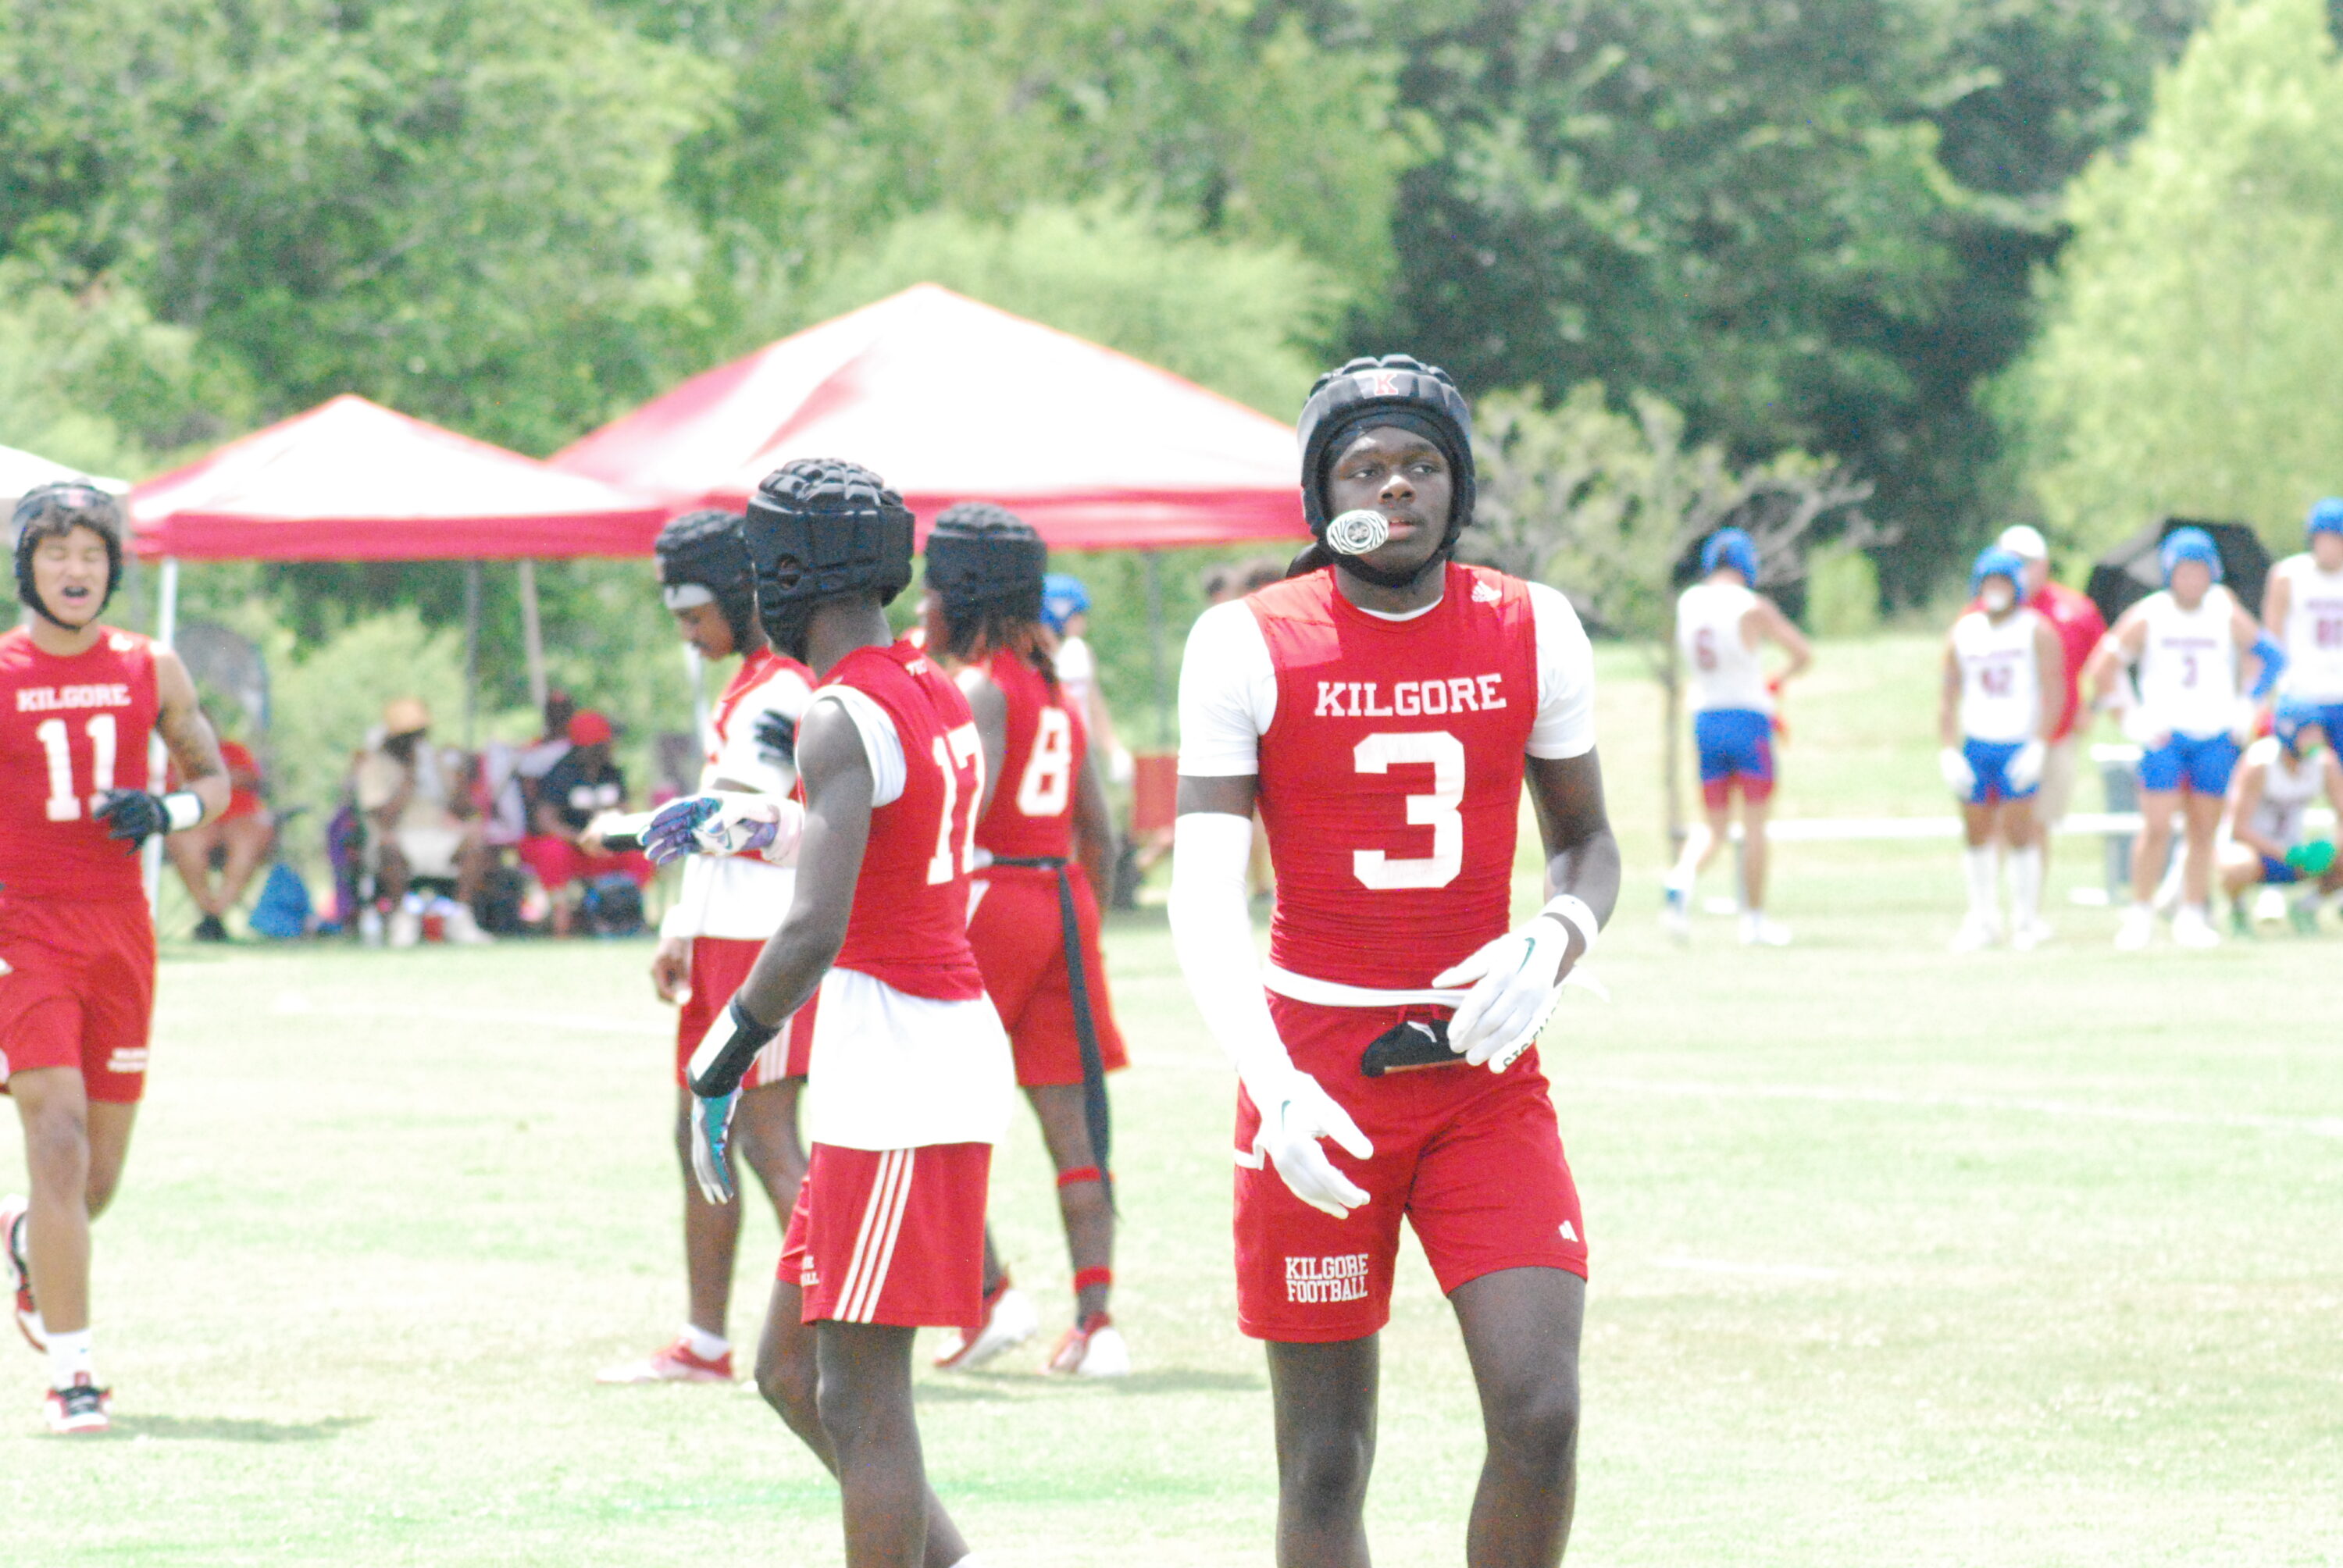 Kilgore cornerback Jayden Sanders (3) was named the defensive most valuable player of the Texas State 7-on-7 Tournament as part of the Dave Campbell's Texas Football All-Tournament Team. The tournament was played this past week at Veterans Park in College Station, and both Kilgore and Sabine were in it. Kilgore made the semifinals, losing to eventual champion Hamshire-Fannett, a team the Bulldogs had beaten in overtime earlier in the event. (Photo by MITCH LUCAS - ETBLITZ.COM)